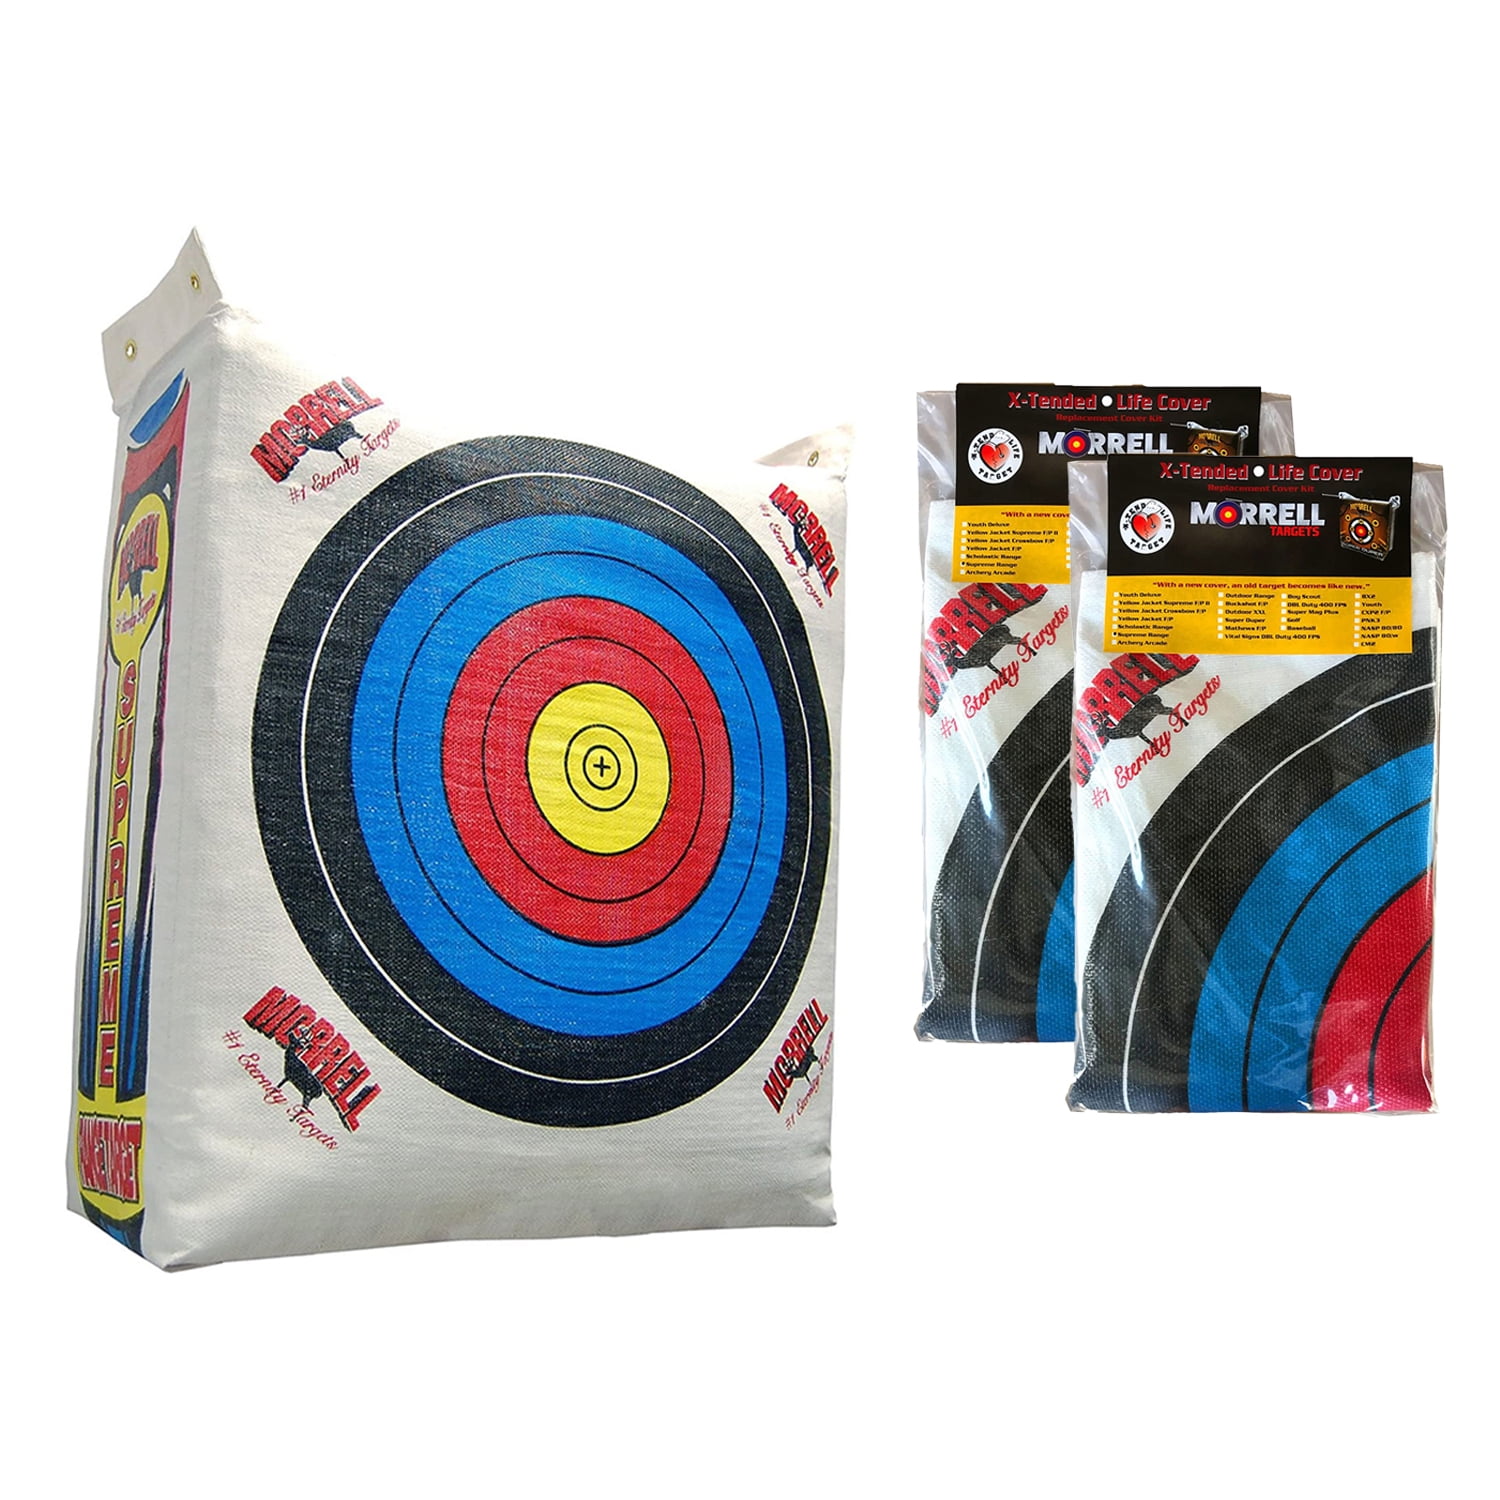 Archery Target Cover Field Point Practice Bag Shooting Hunting Crossbow Replace 